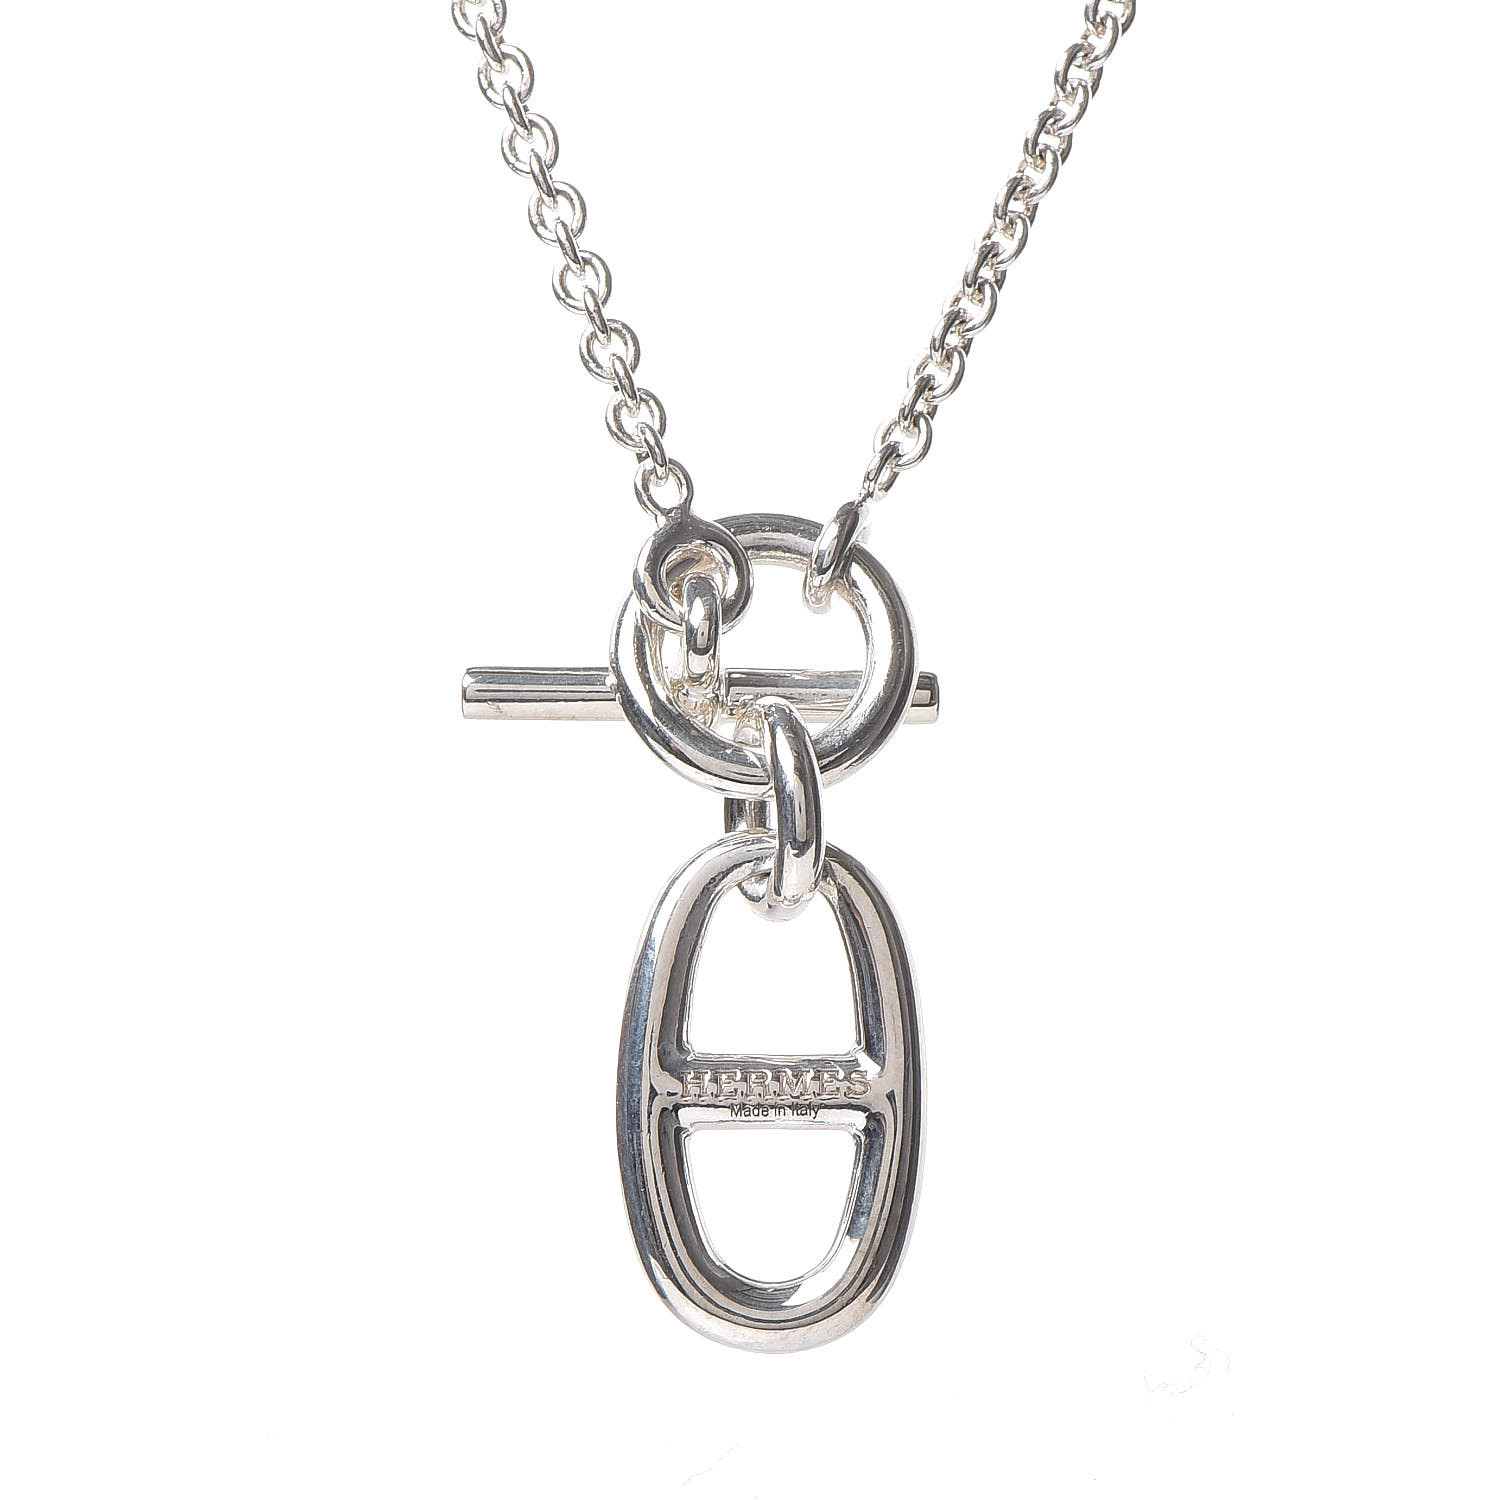 HERMES Sterling Silver Amulette Chaine D Ancre Necklace 418015